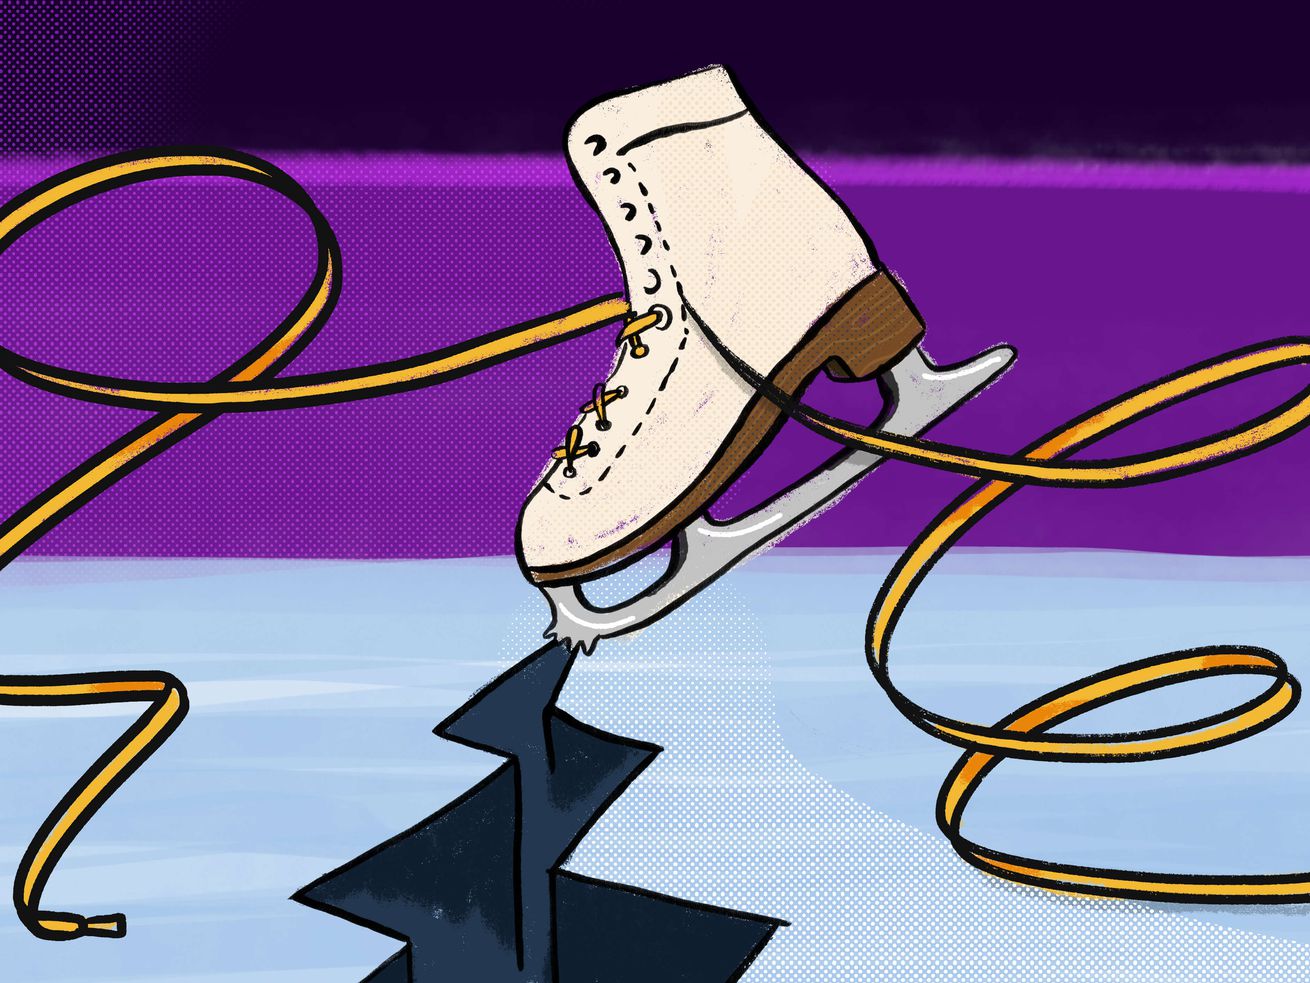 Figure skating is on thin ice. Here’s how to fix it.